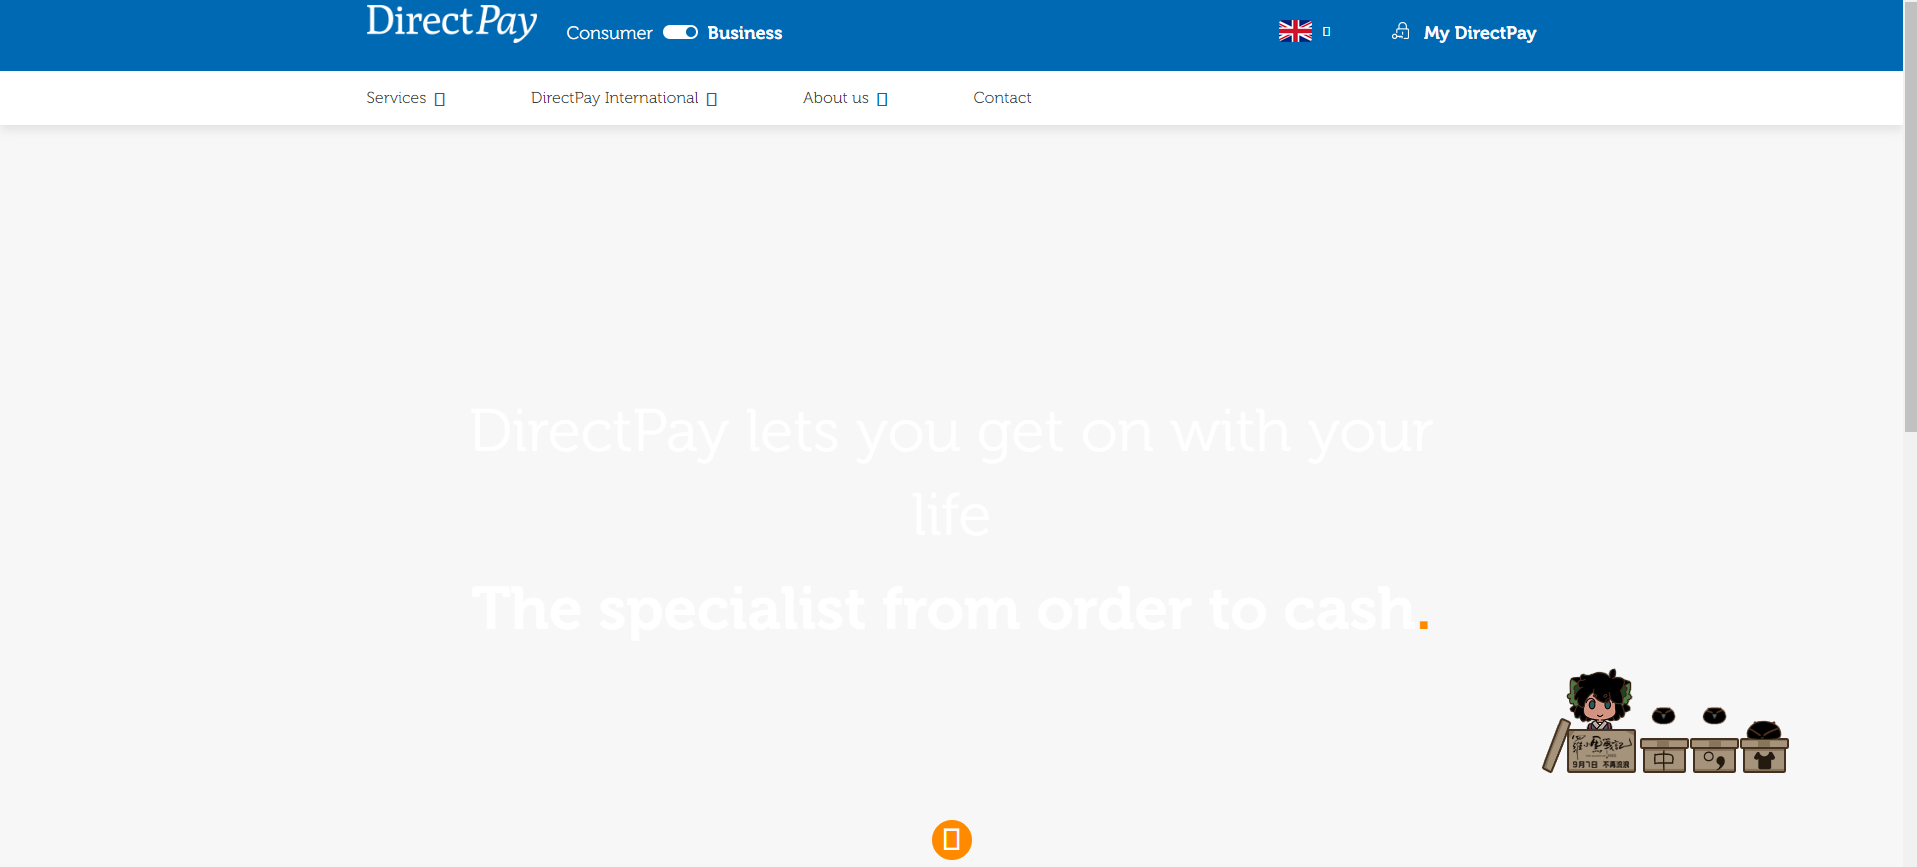 DirectPay